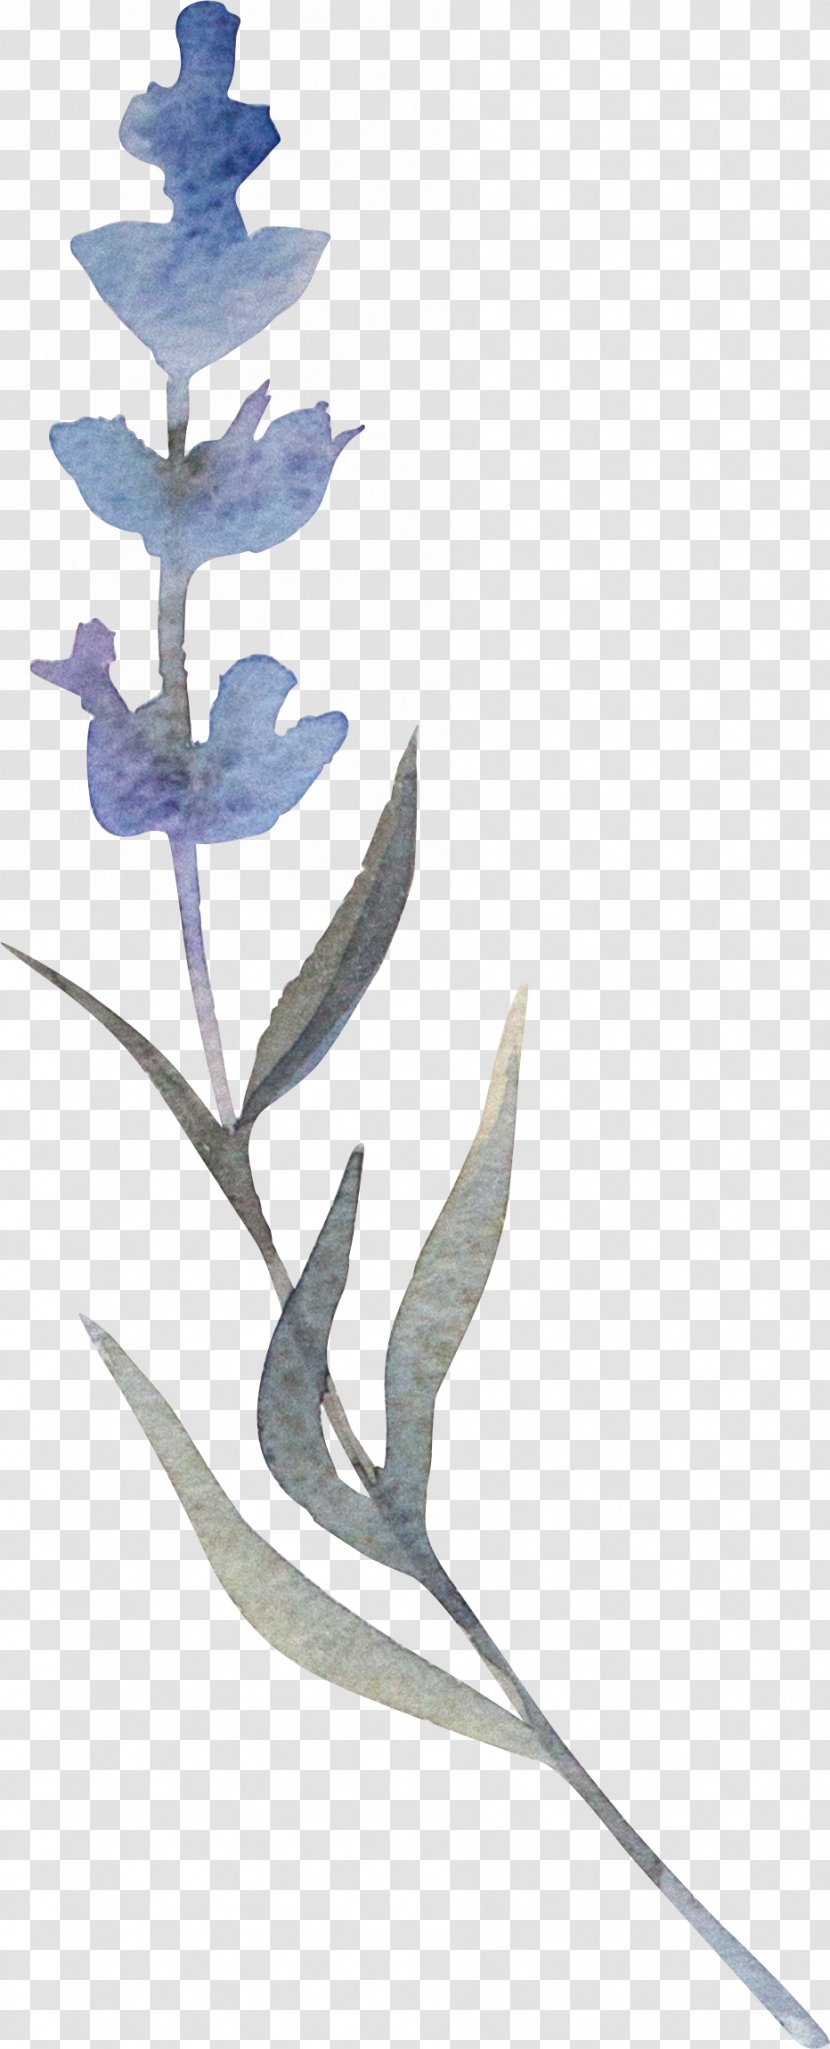 Watercolor Painting Flower Illustration - Aesthetics - Hand-painted Plants Transparent PNG